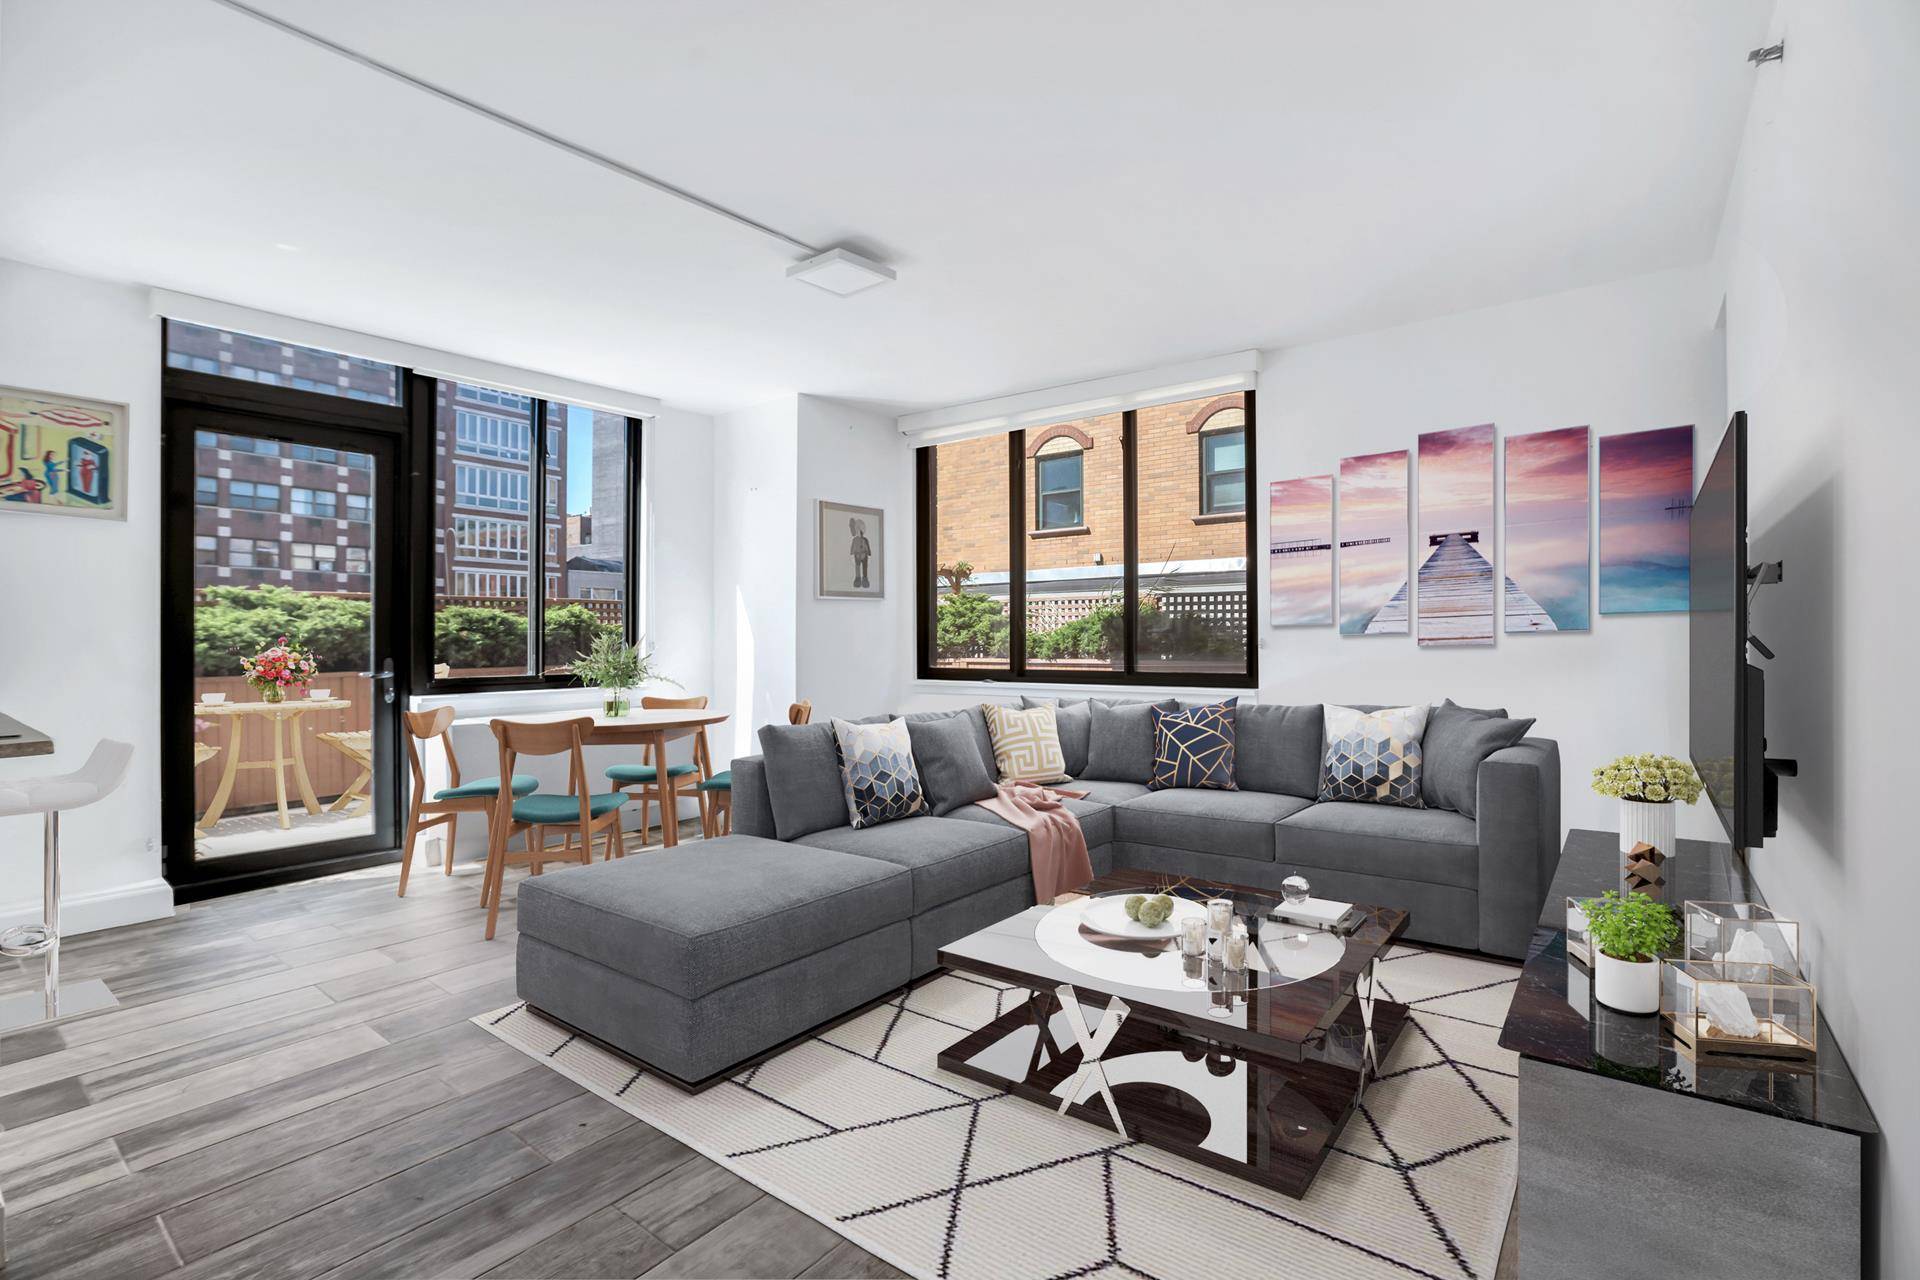 Located in the heart of Nolita, where Bowery meets Spring Street this sunbathed 2 bedroom 2 bathroom home features oversized windows, queen amp ; king sized bedrooms amp ; a ...